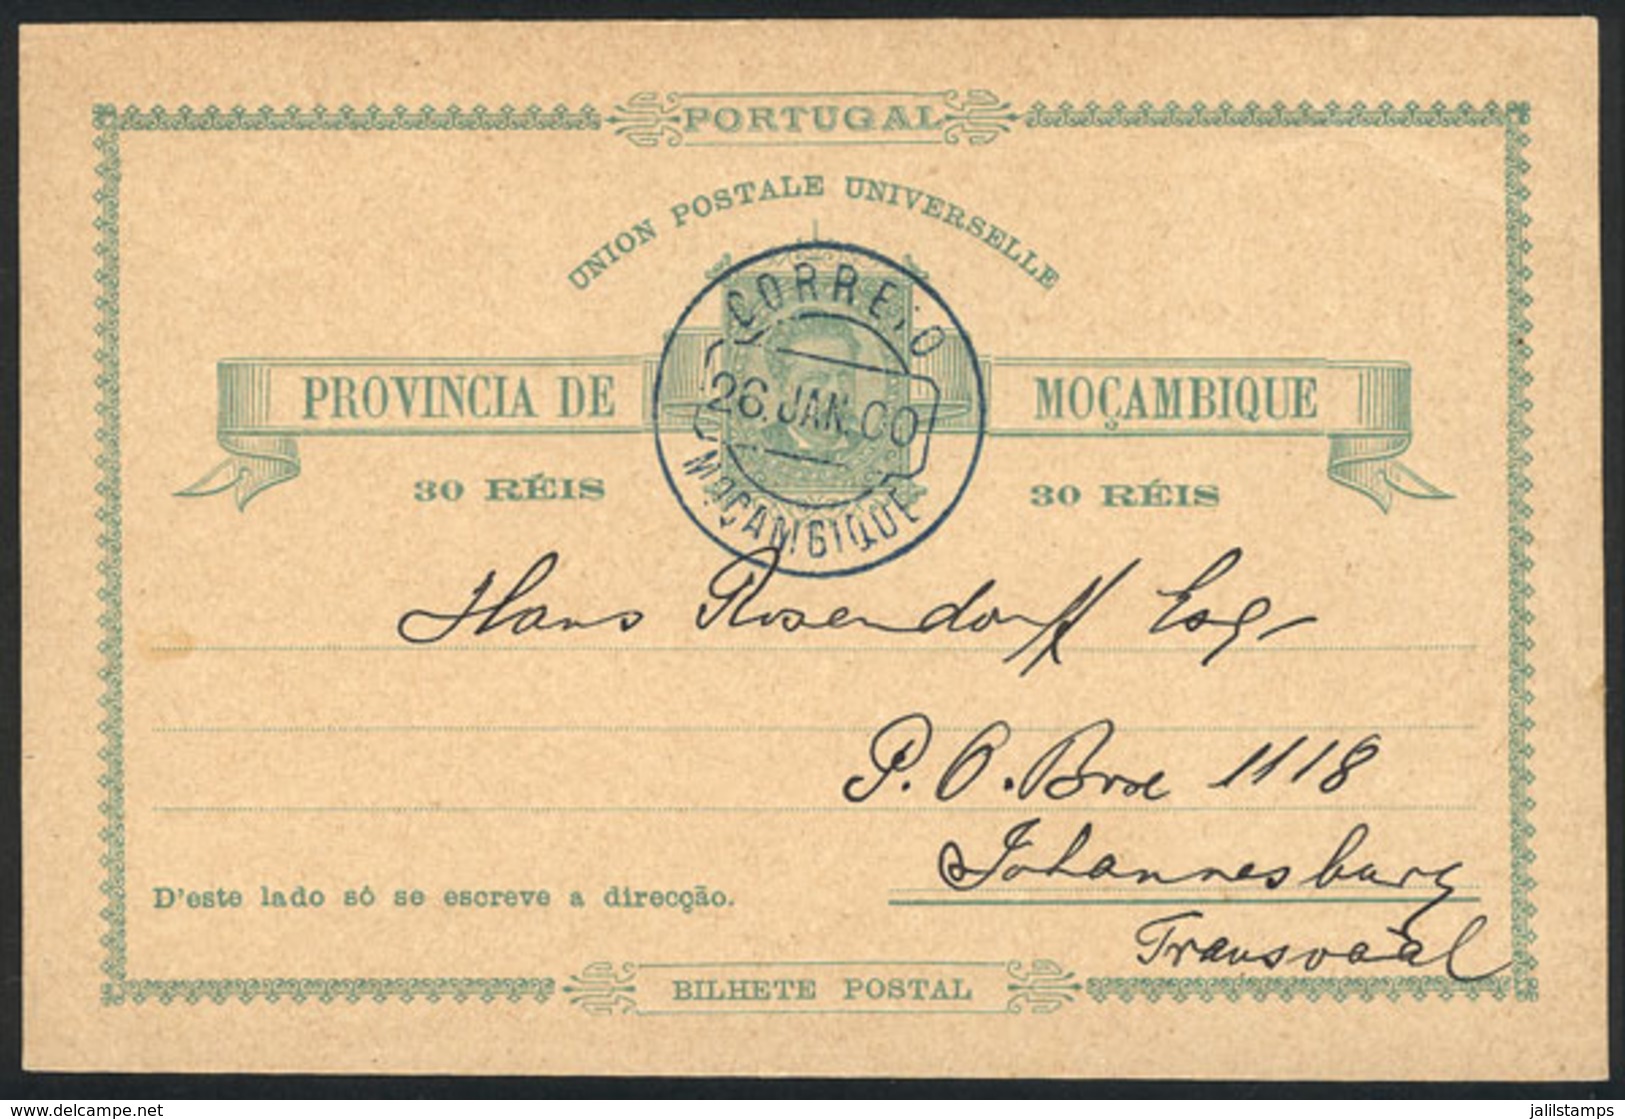 MOZAMBIQUE: 30Rs. Postal Card Sent From Mozambique To Johannesburg On 26/JA/1900, Excellent Quality! - Mozambique